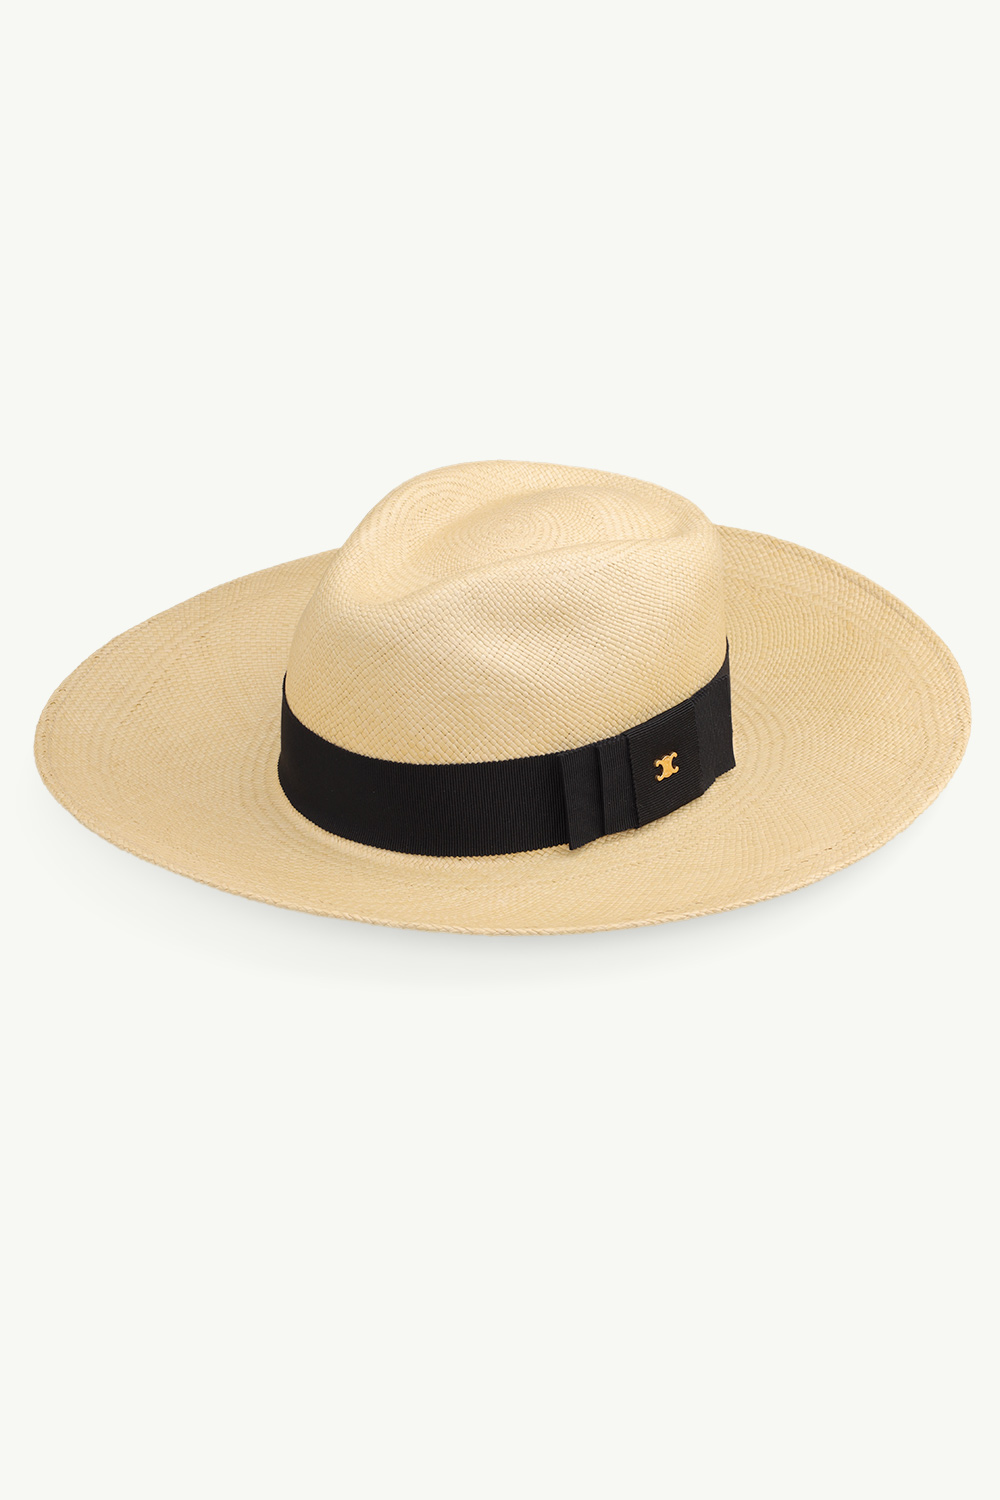 CELINE Women Straw Panama Hat in Natural with Triomphe Signature 2